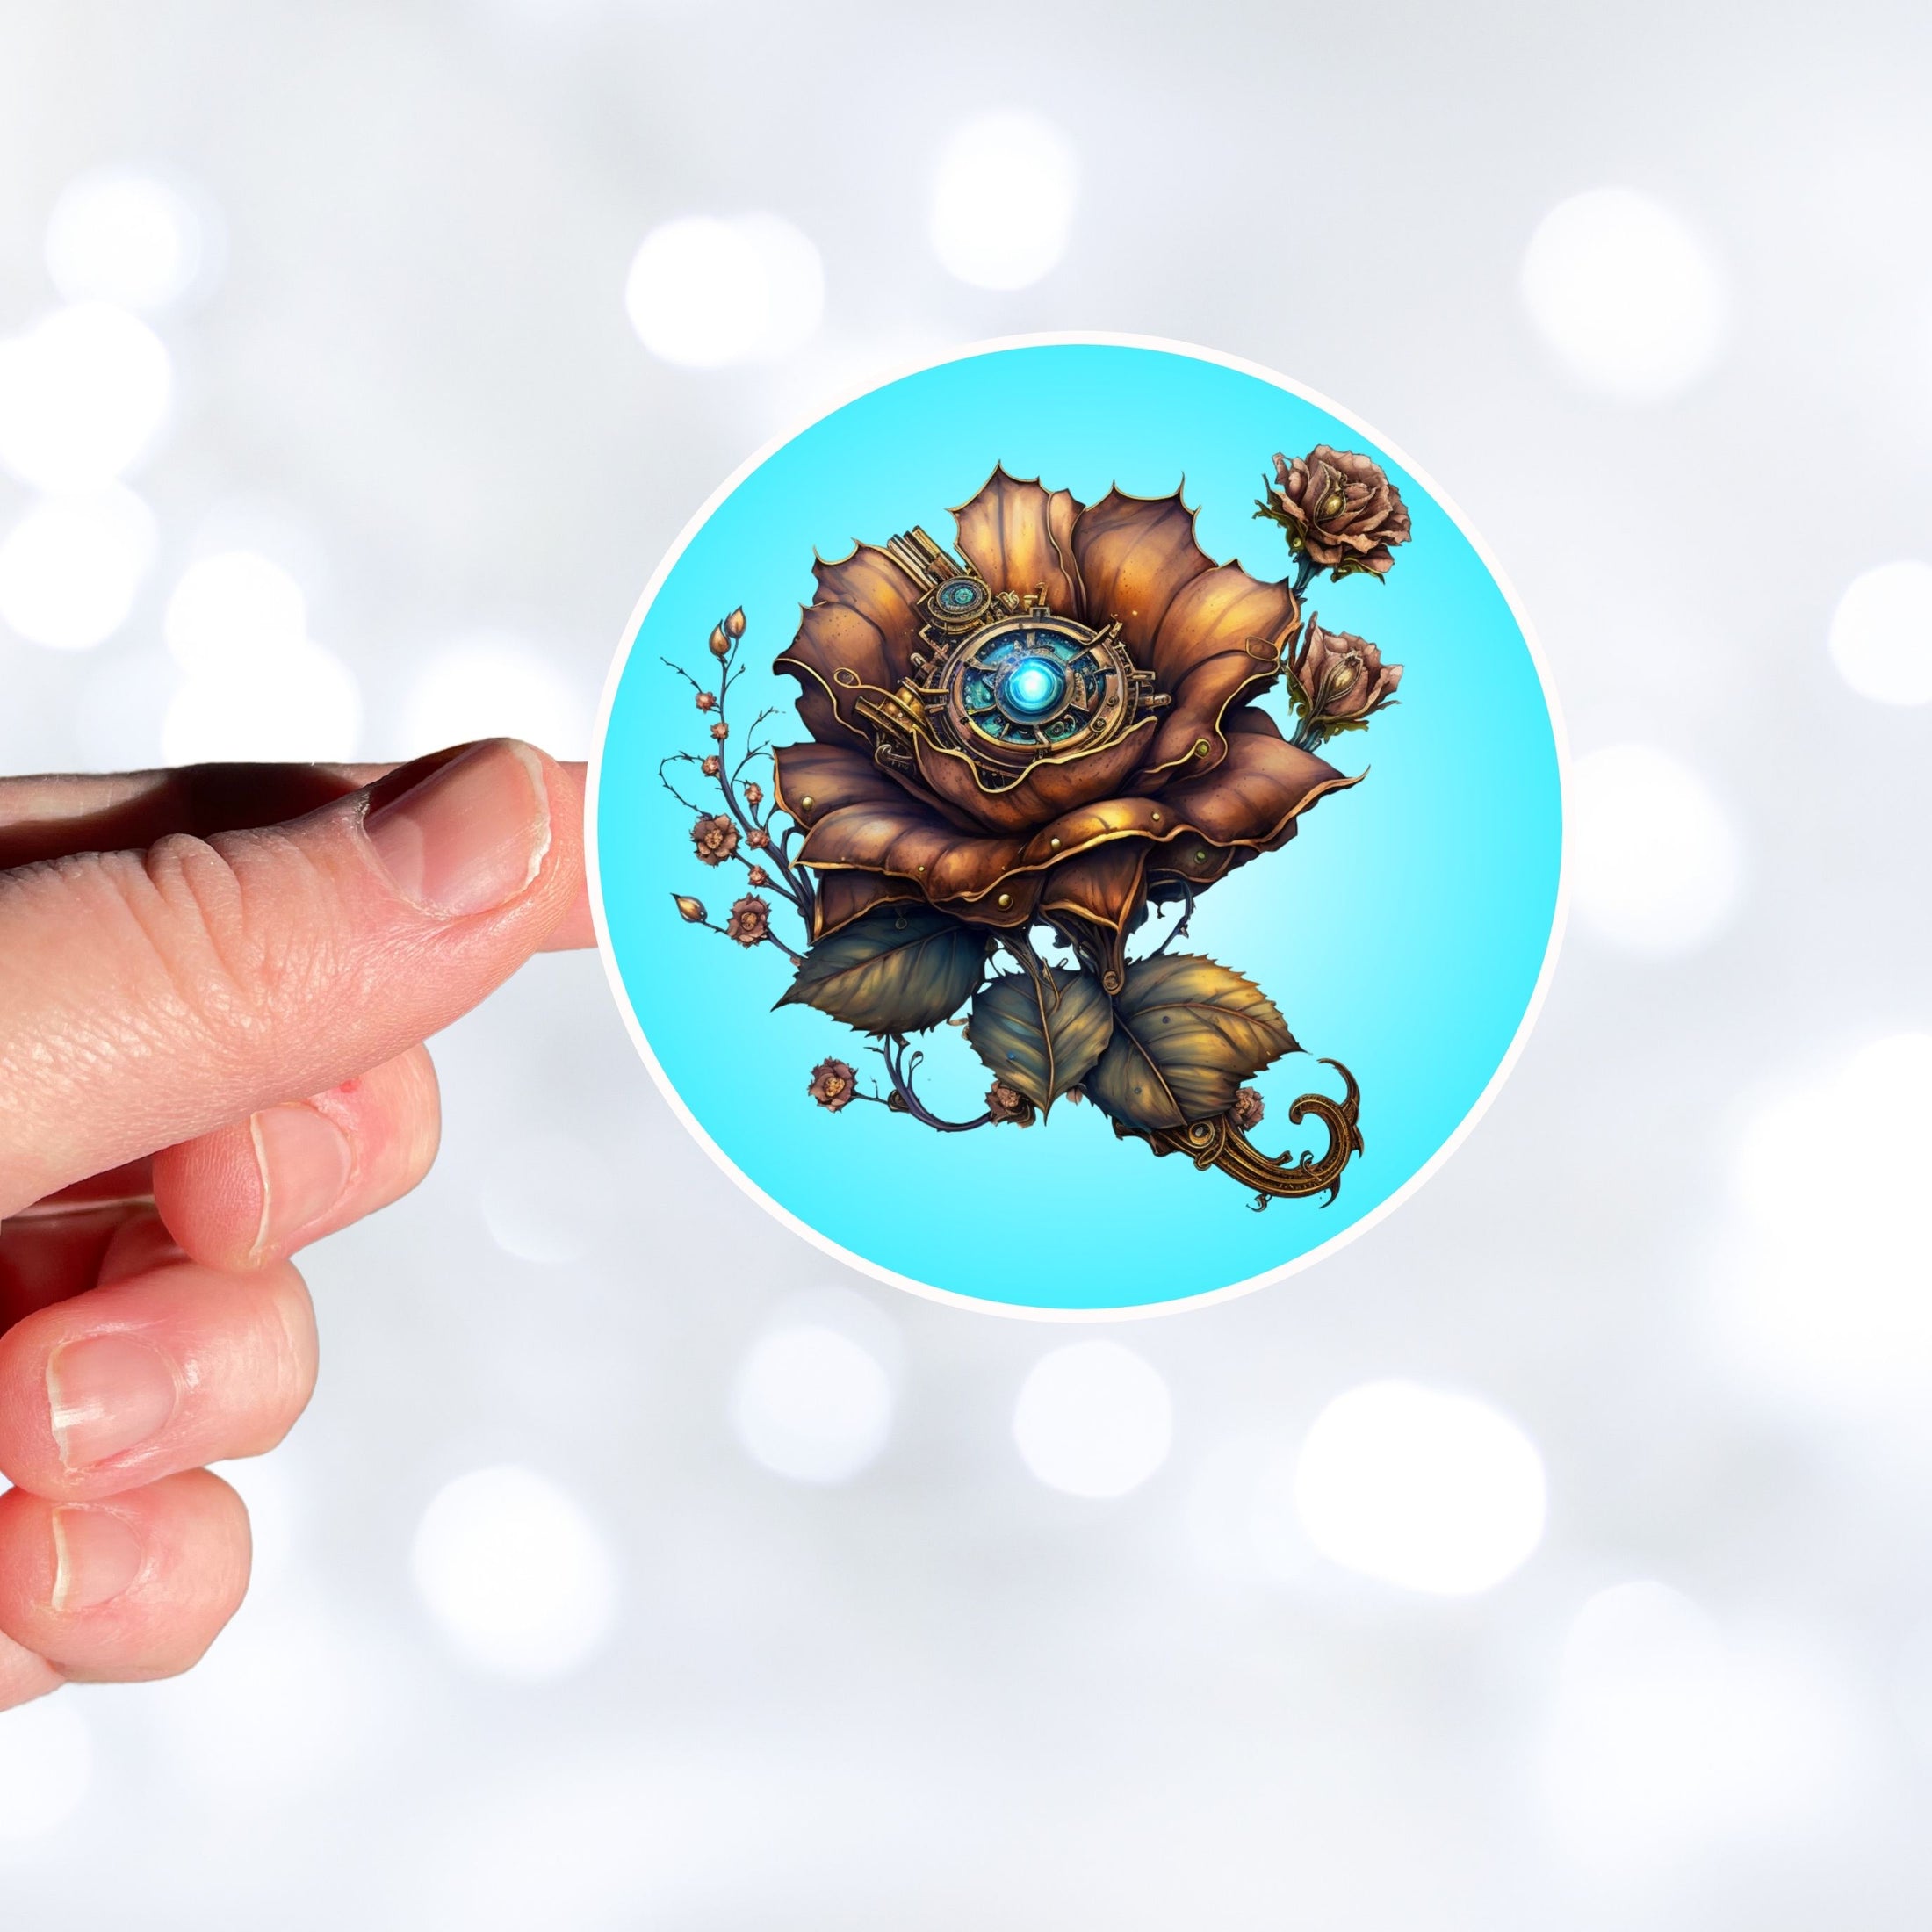 This image shows a hand holding the steampunk bronzed flower sticker.